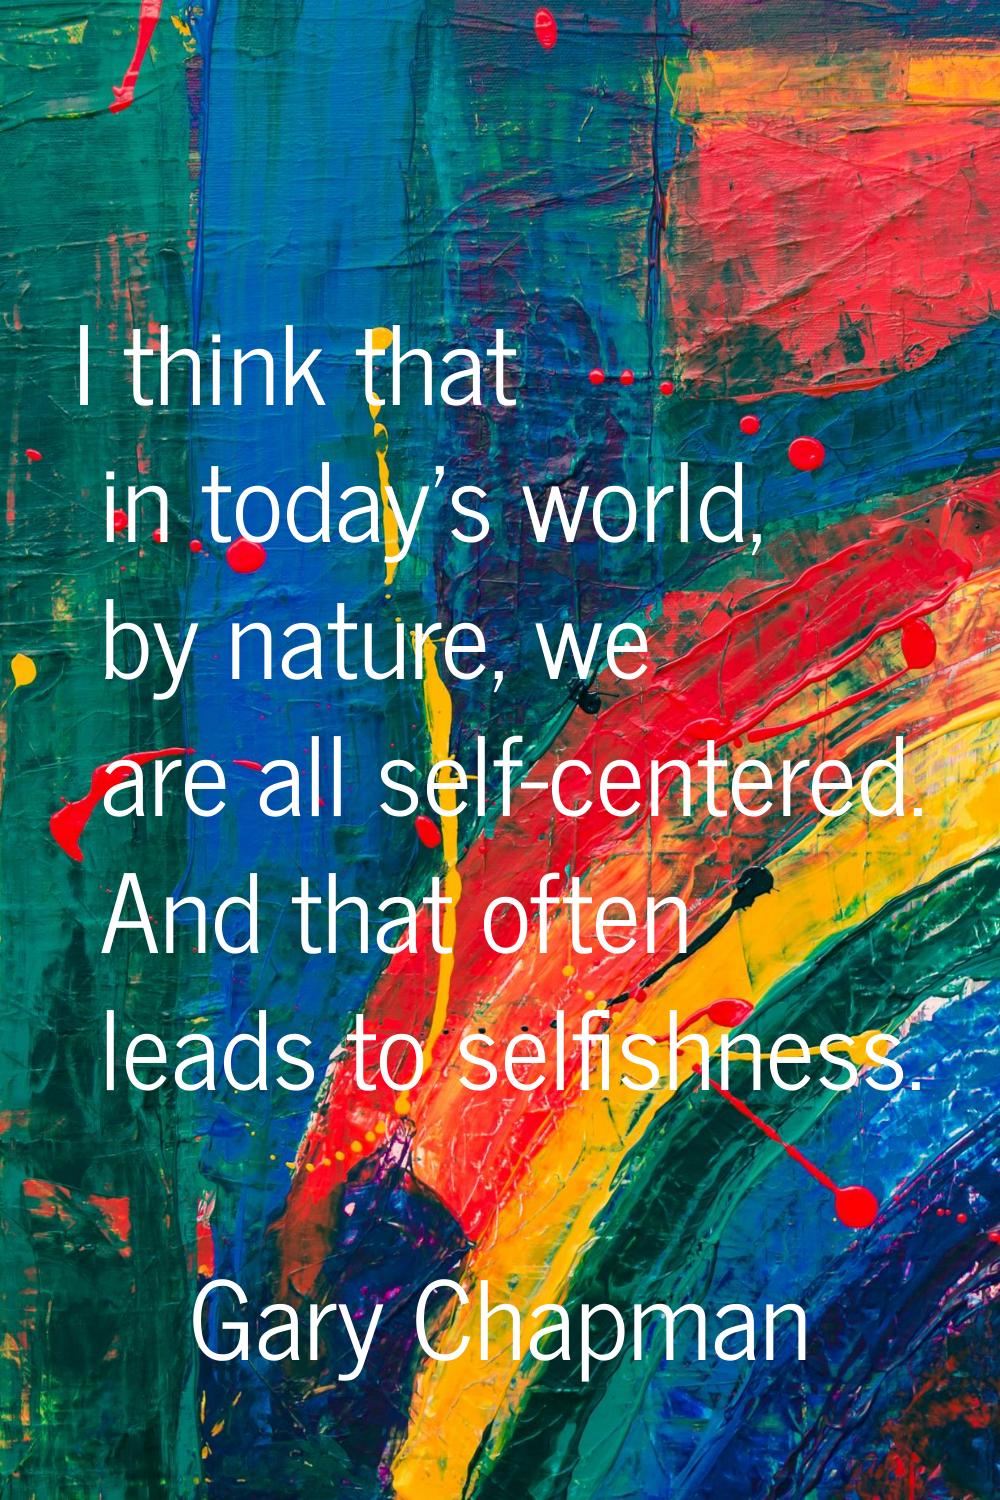 I think that in today's world, by nature, we are all self-centered. And that often leads to selfish